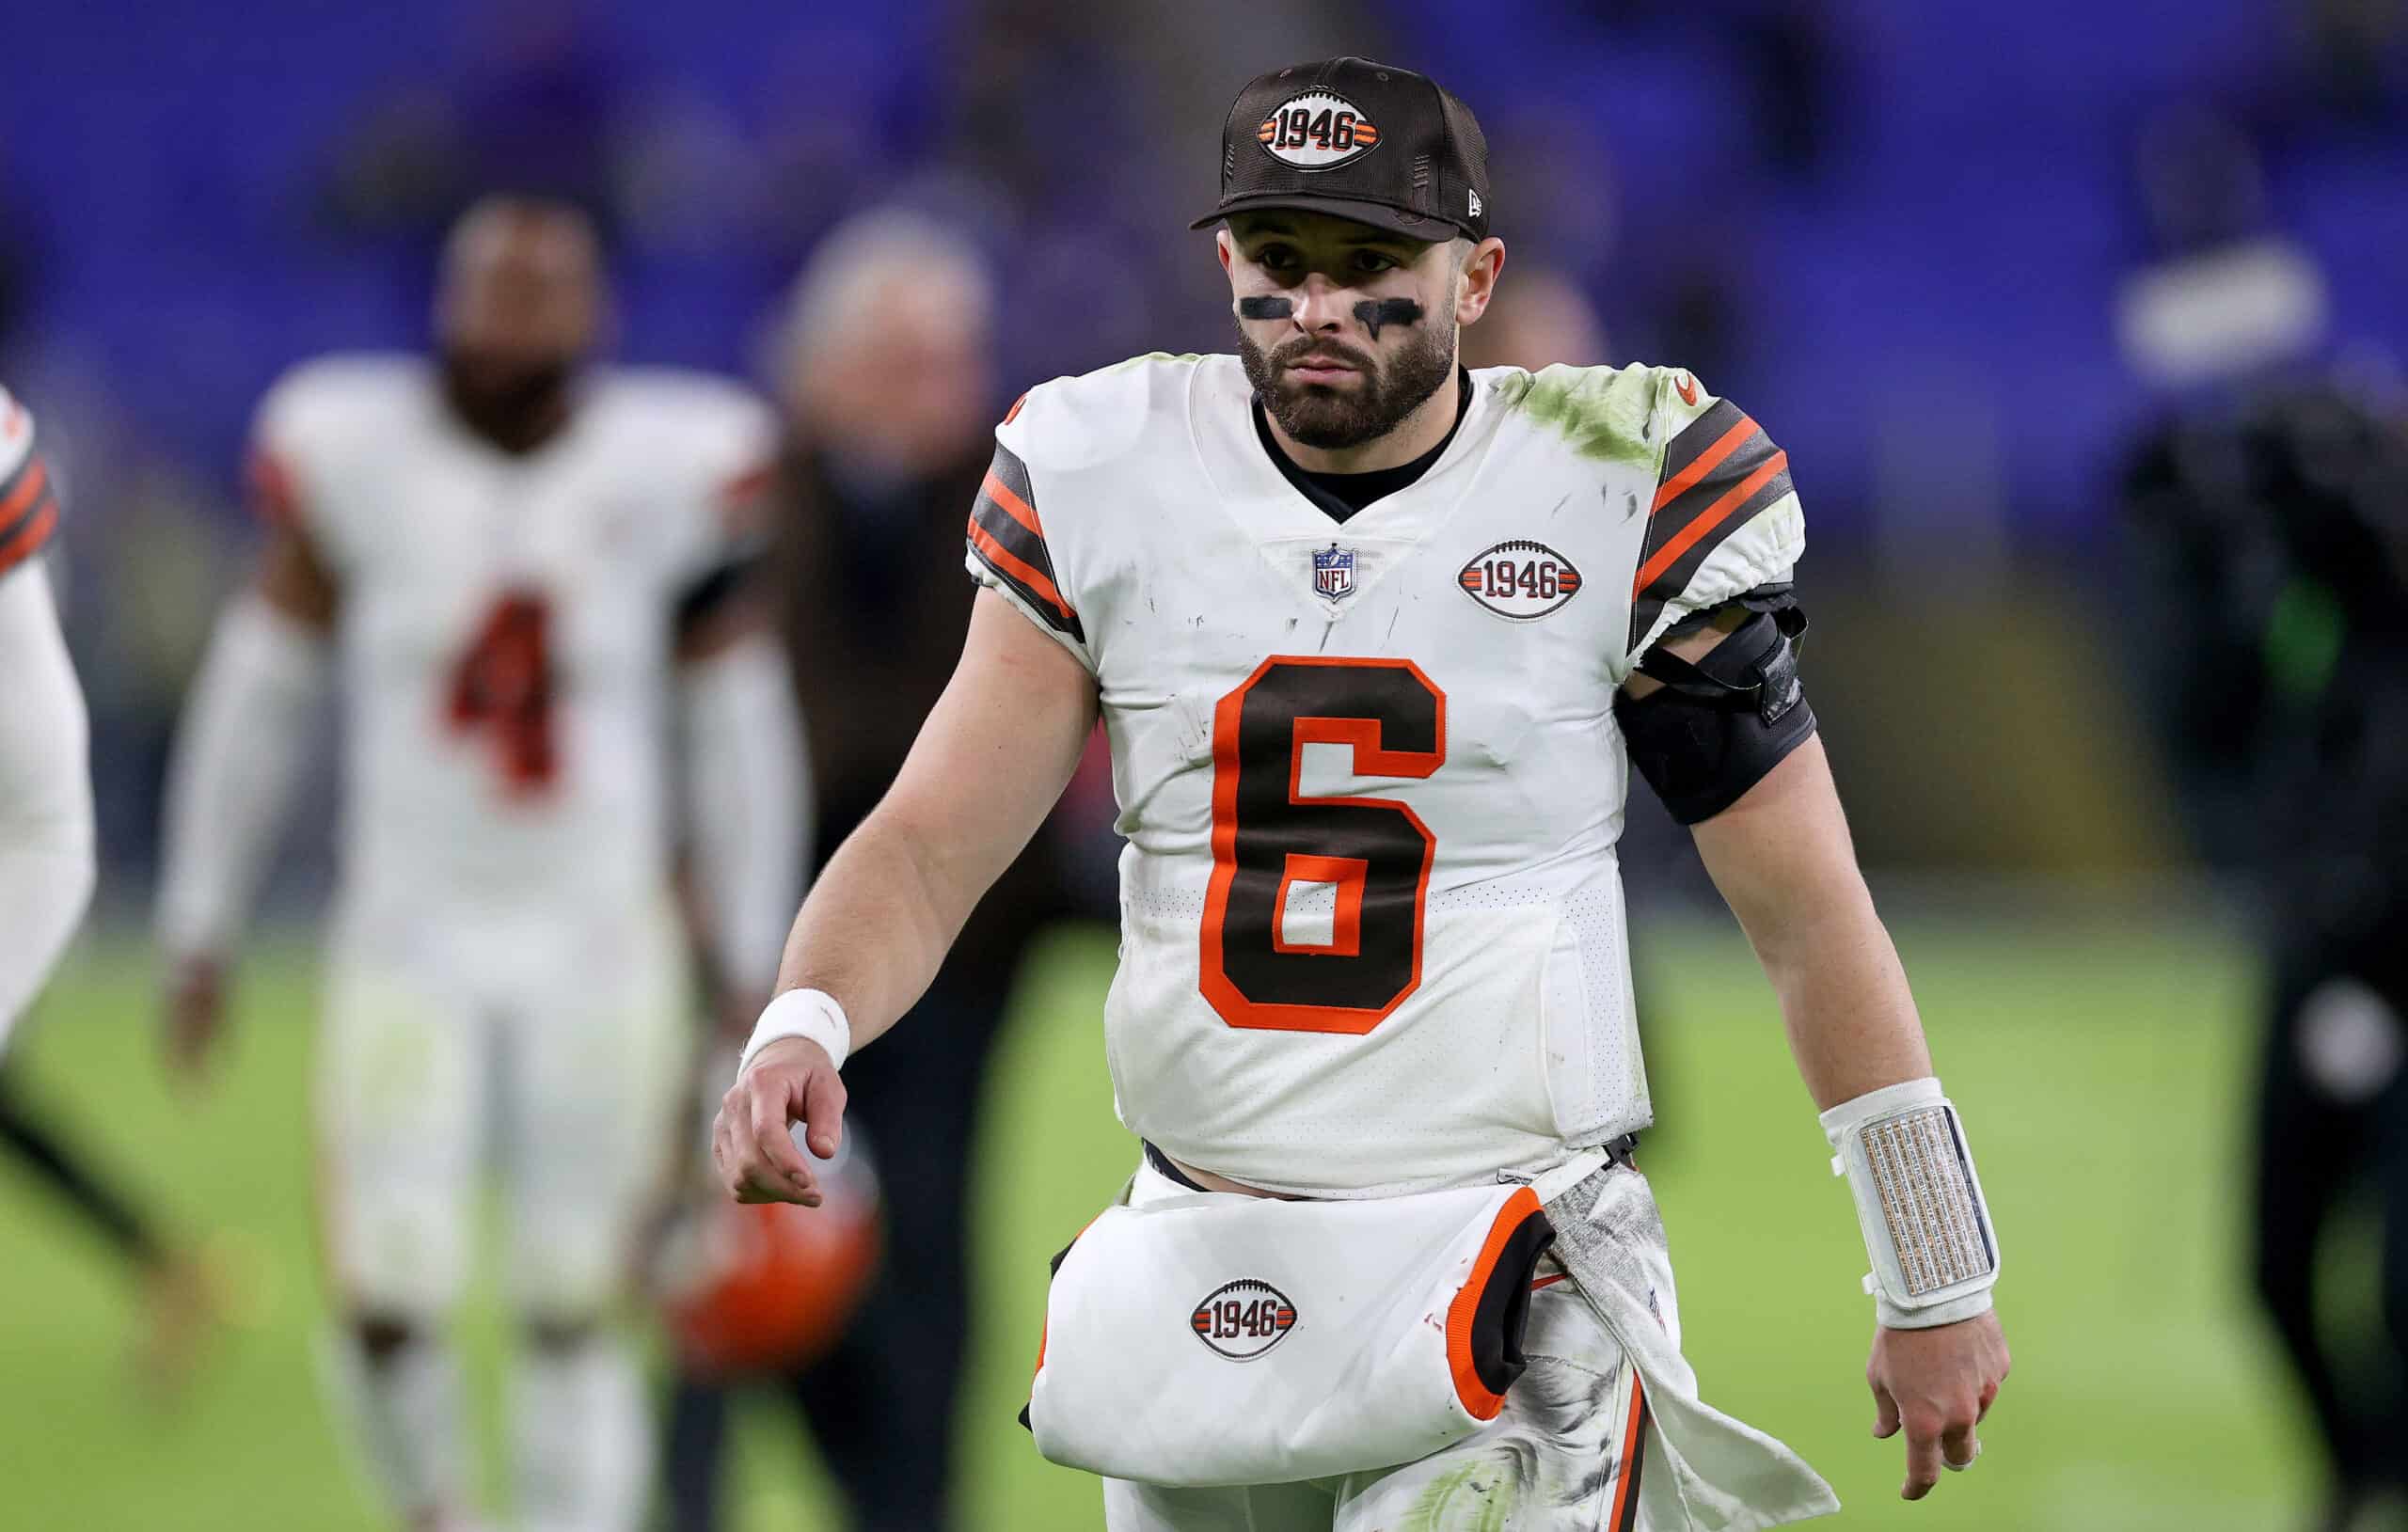 Baker Mayfield #6 of the Cleveland Browns looks on during a game against the Baltimore Ravens at M&T Bank Stadium on November 28, 2021 in Baltimore, Maryland.